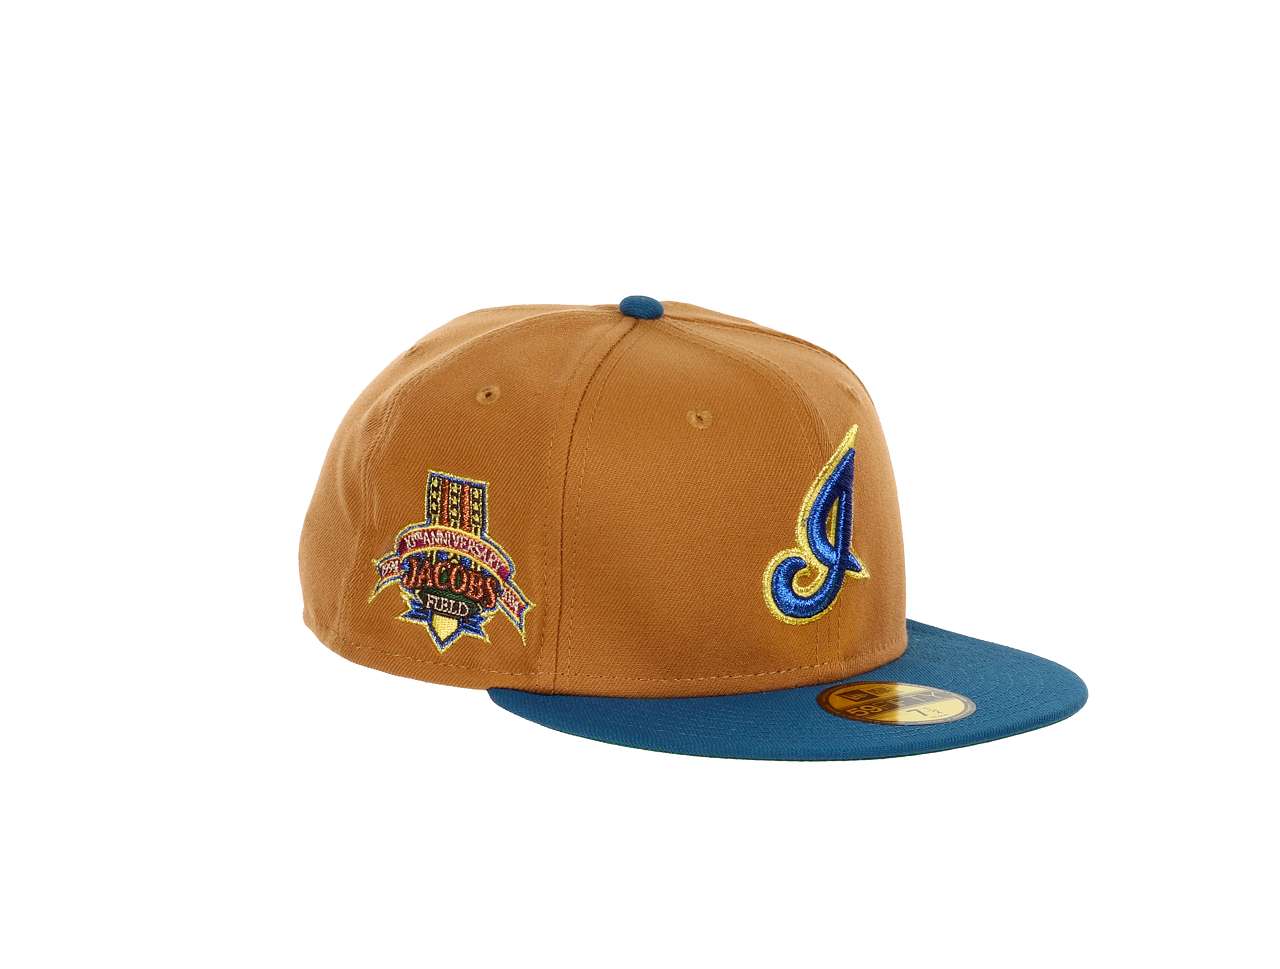 Cleveland Indians MLB Jacobs Field 10th Anniversary Sidepatch Brown Gold Blue 59Fifty Basecap New Era